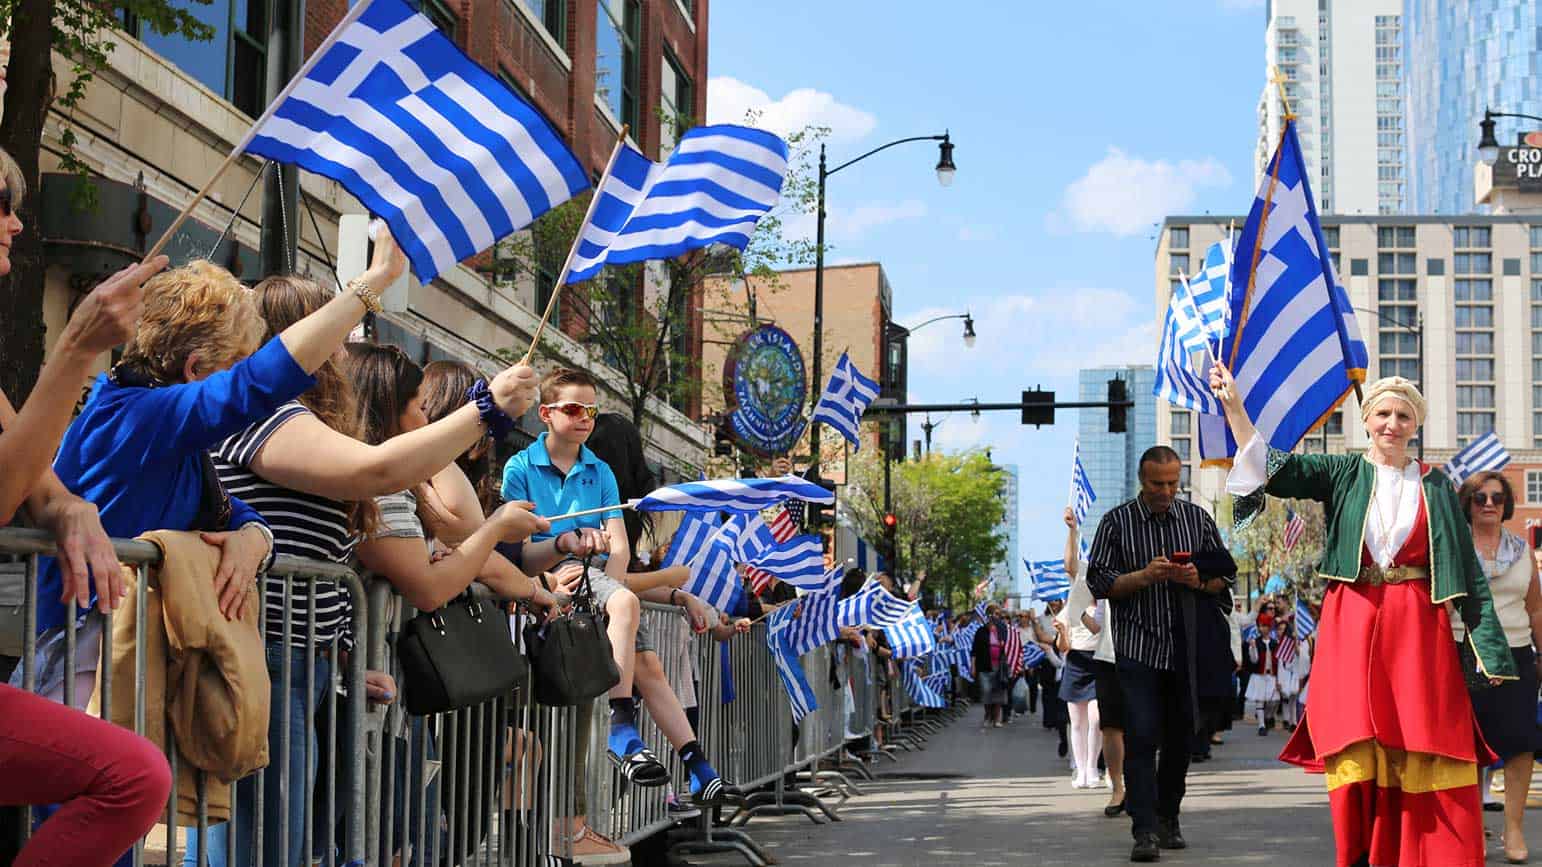 Chicago Greek Heritage parade marches for 200 years since Greek war of